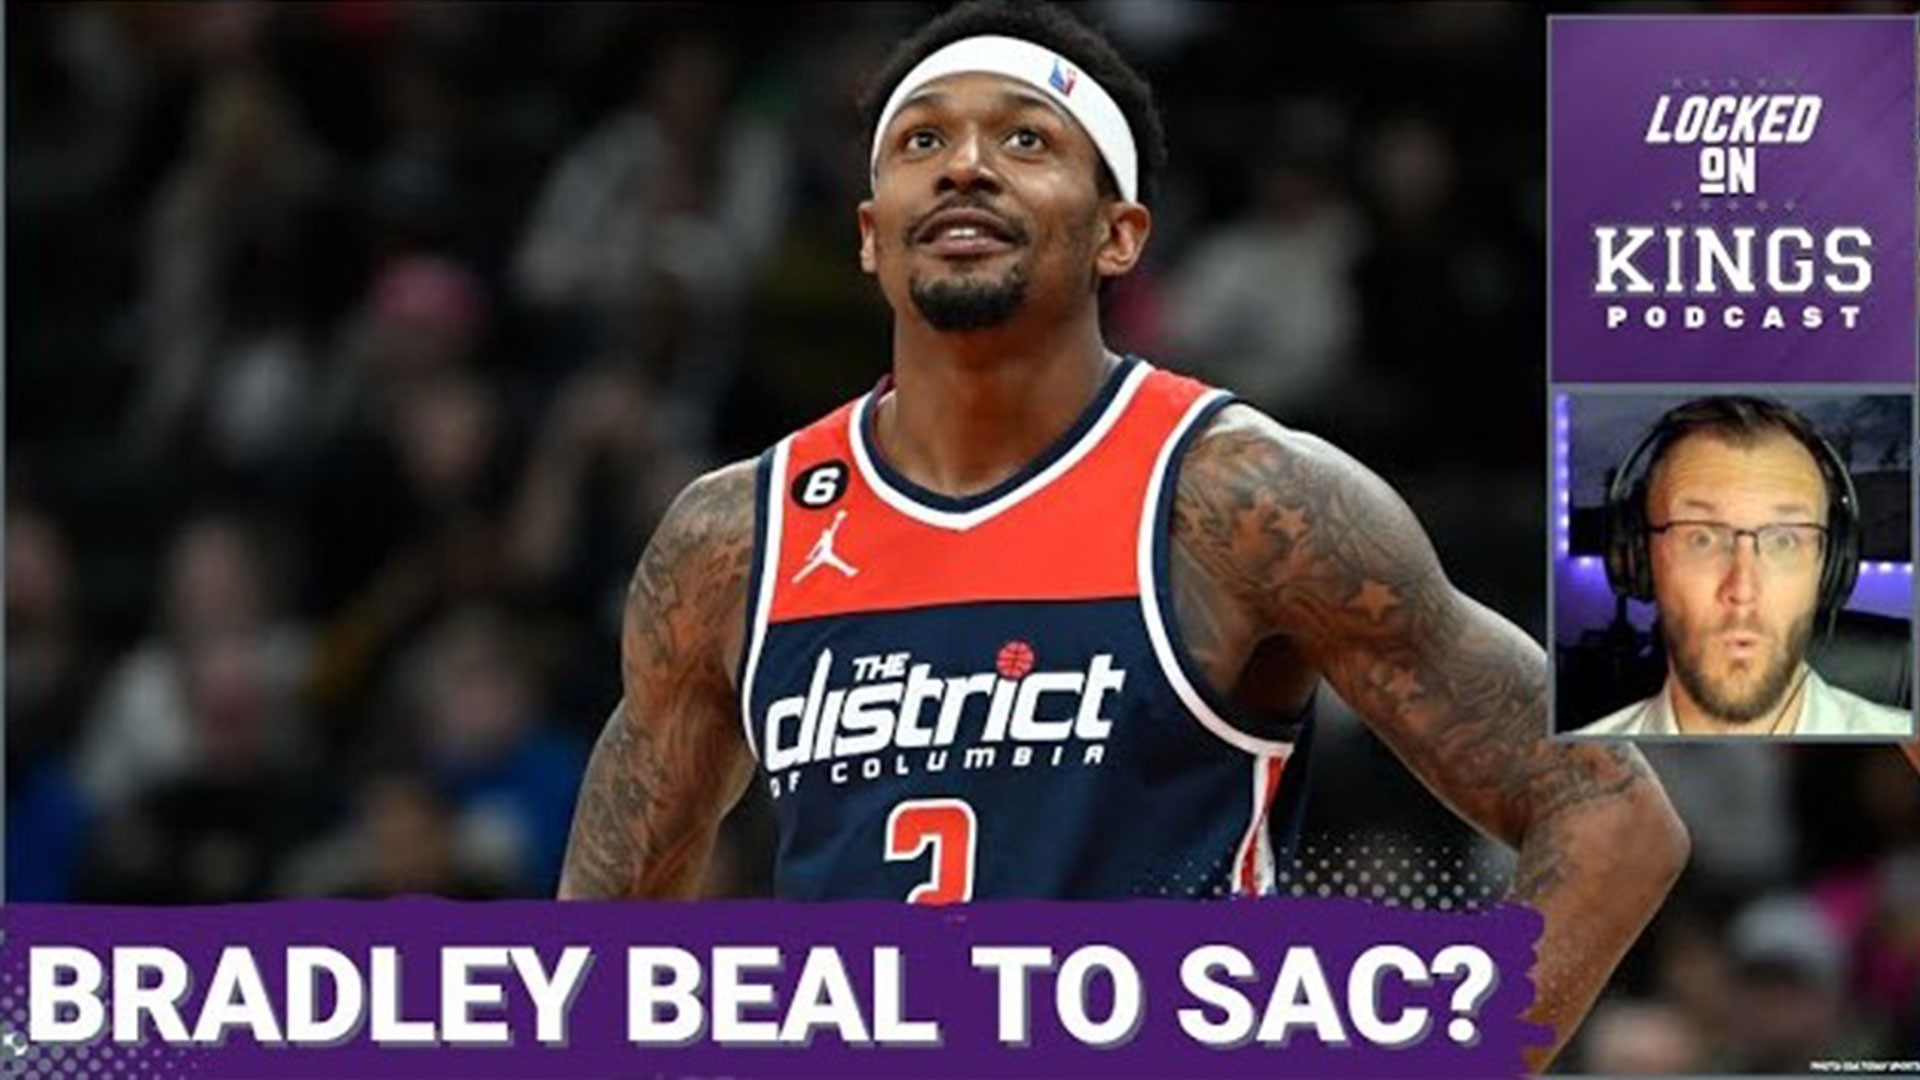 Matt George discusses the latest reports that the Kings have had trade conversations with the Washington Wizards about Bradley Beal.